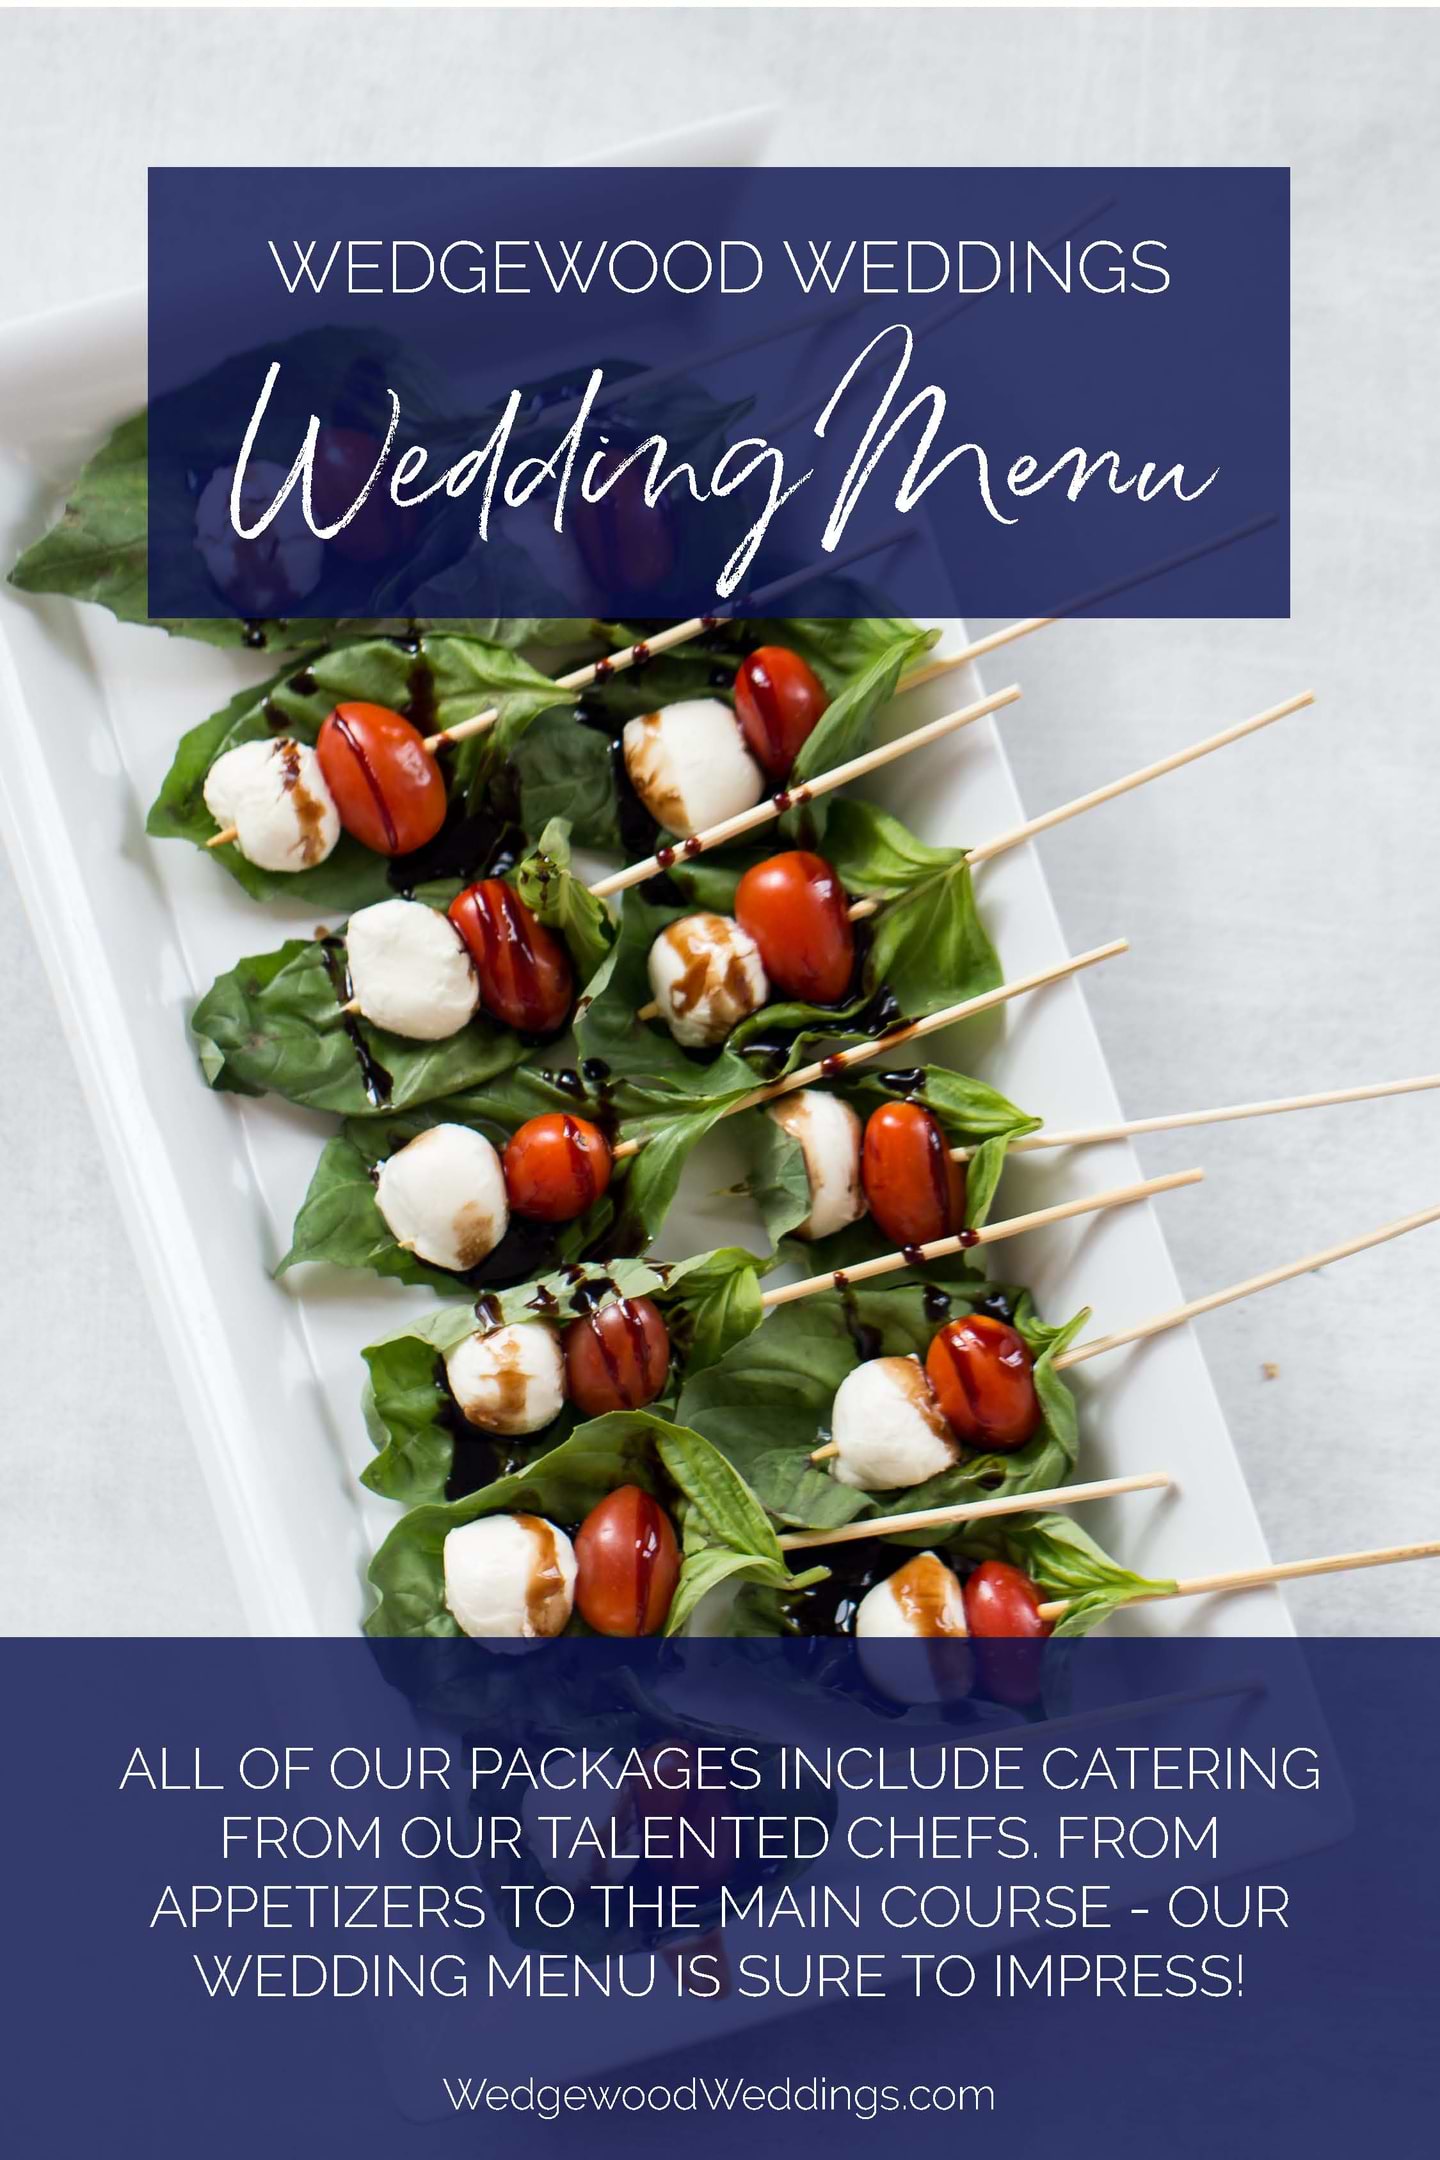 What makes the best wedding food? Awesome wedding menus! Give your guests something to talk about by serving them the best wedding food at an incredible Wedgewood Weddings venue. Get started planning today by calling or texting our expert wedding team at 866.966.3009.